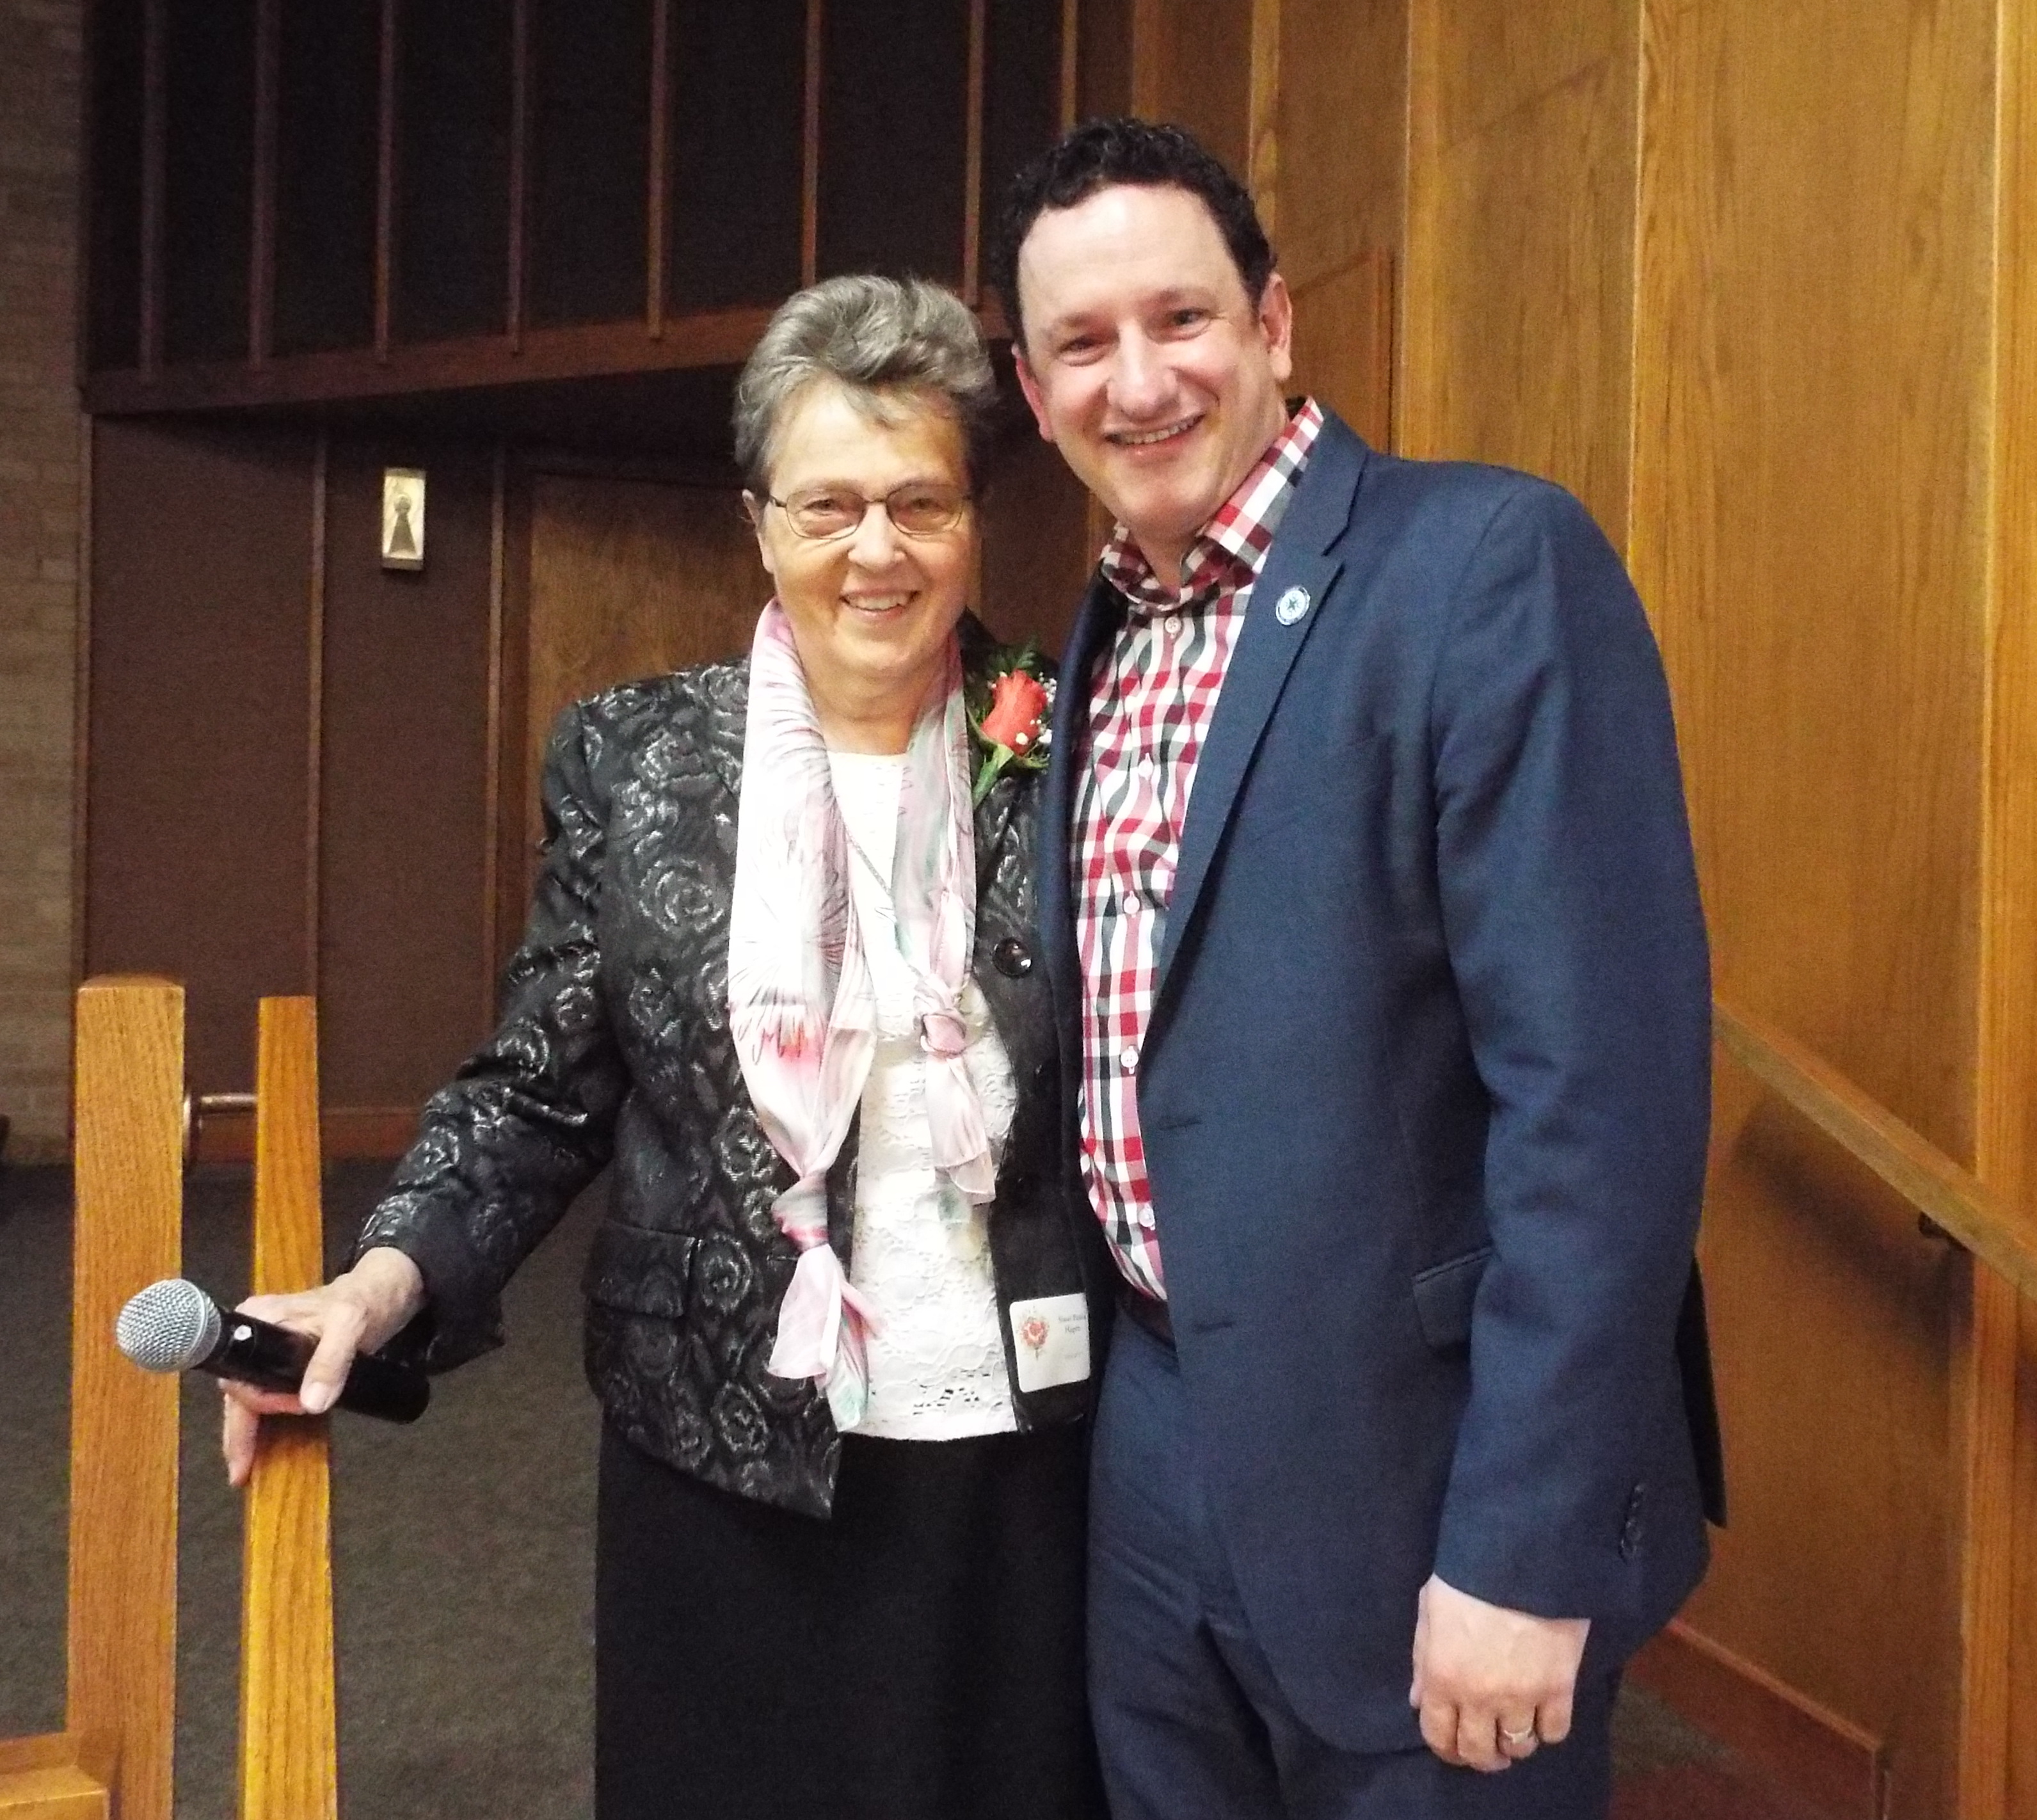 Sister Paula Hagen with Chris Zupfer, Vice President for Development at Hill-Murray School, at the 2018 Prioress Dinner. 